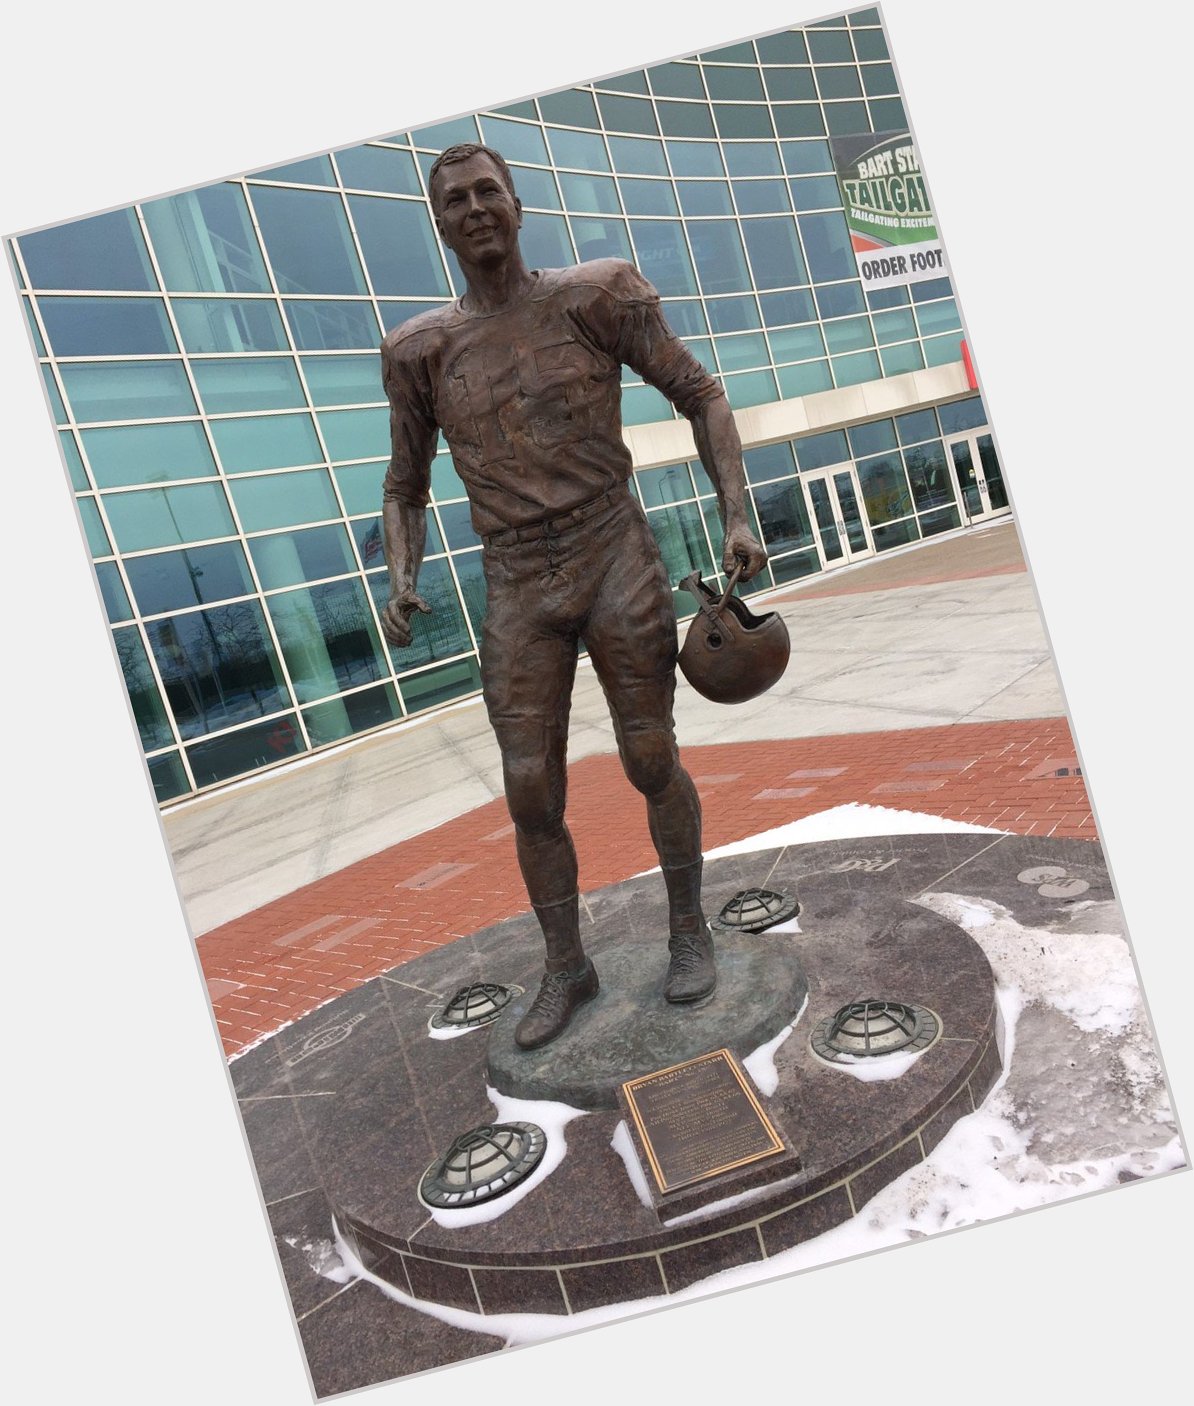 From the home of Bart Starr Plaza, happy 83rd birthday Bart! 